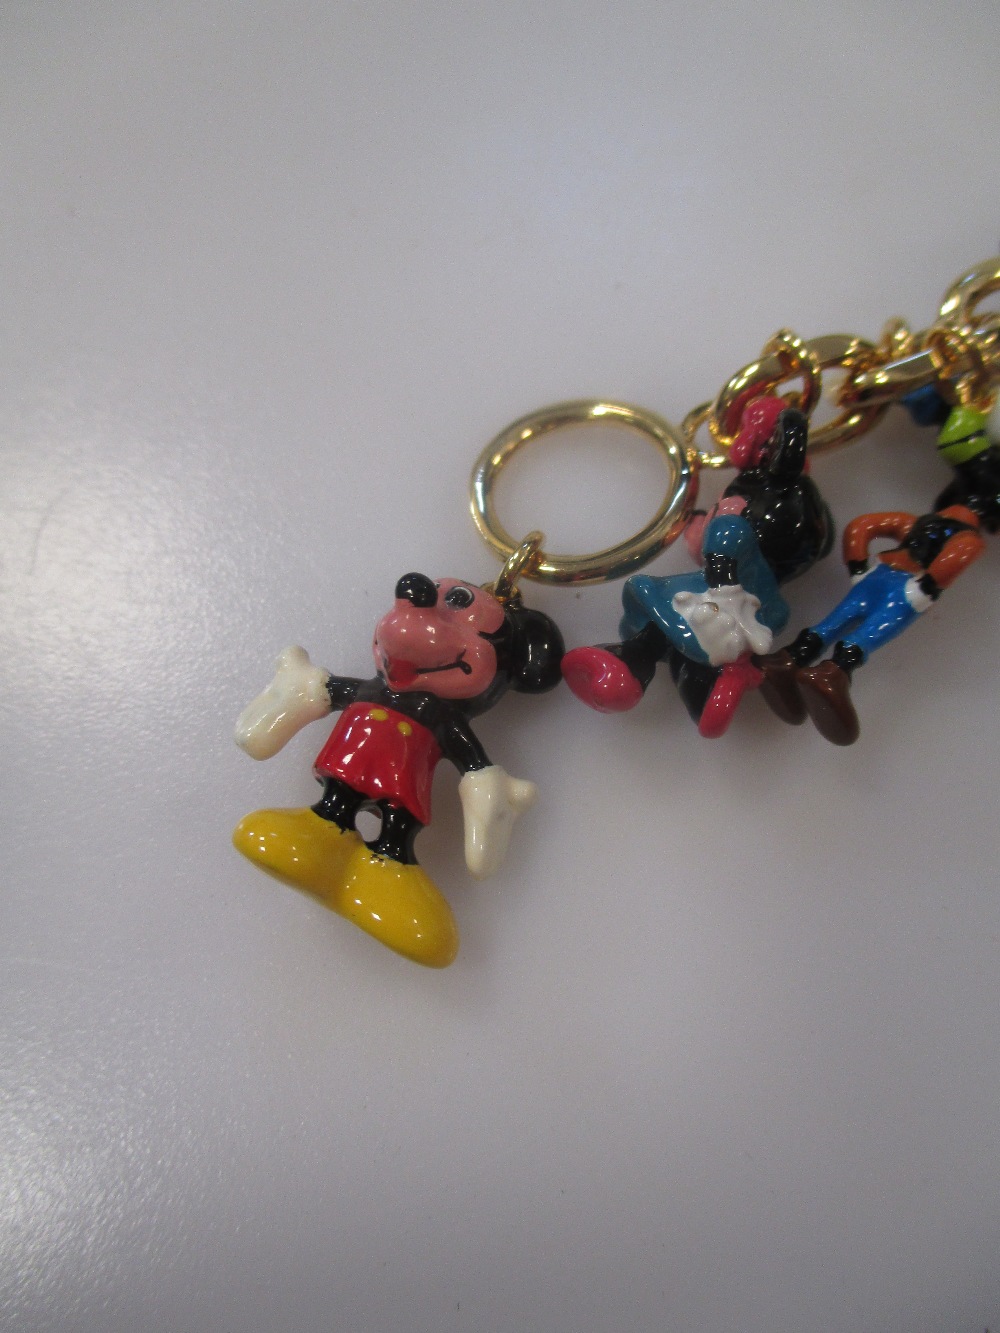 A 24ct Gold Plated Ultimate Disney Classic Charm Bracelet Featuring 37 Disney Characters - Image 2 of 3